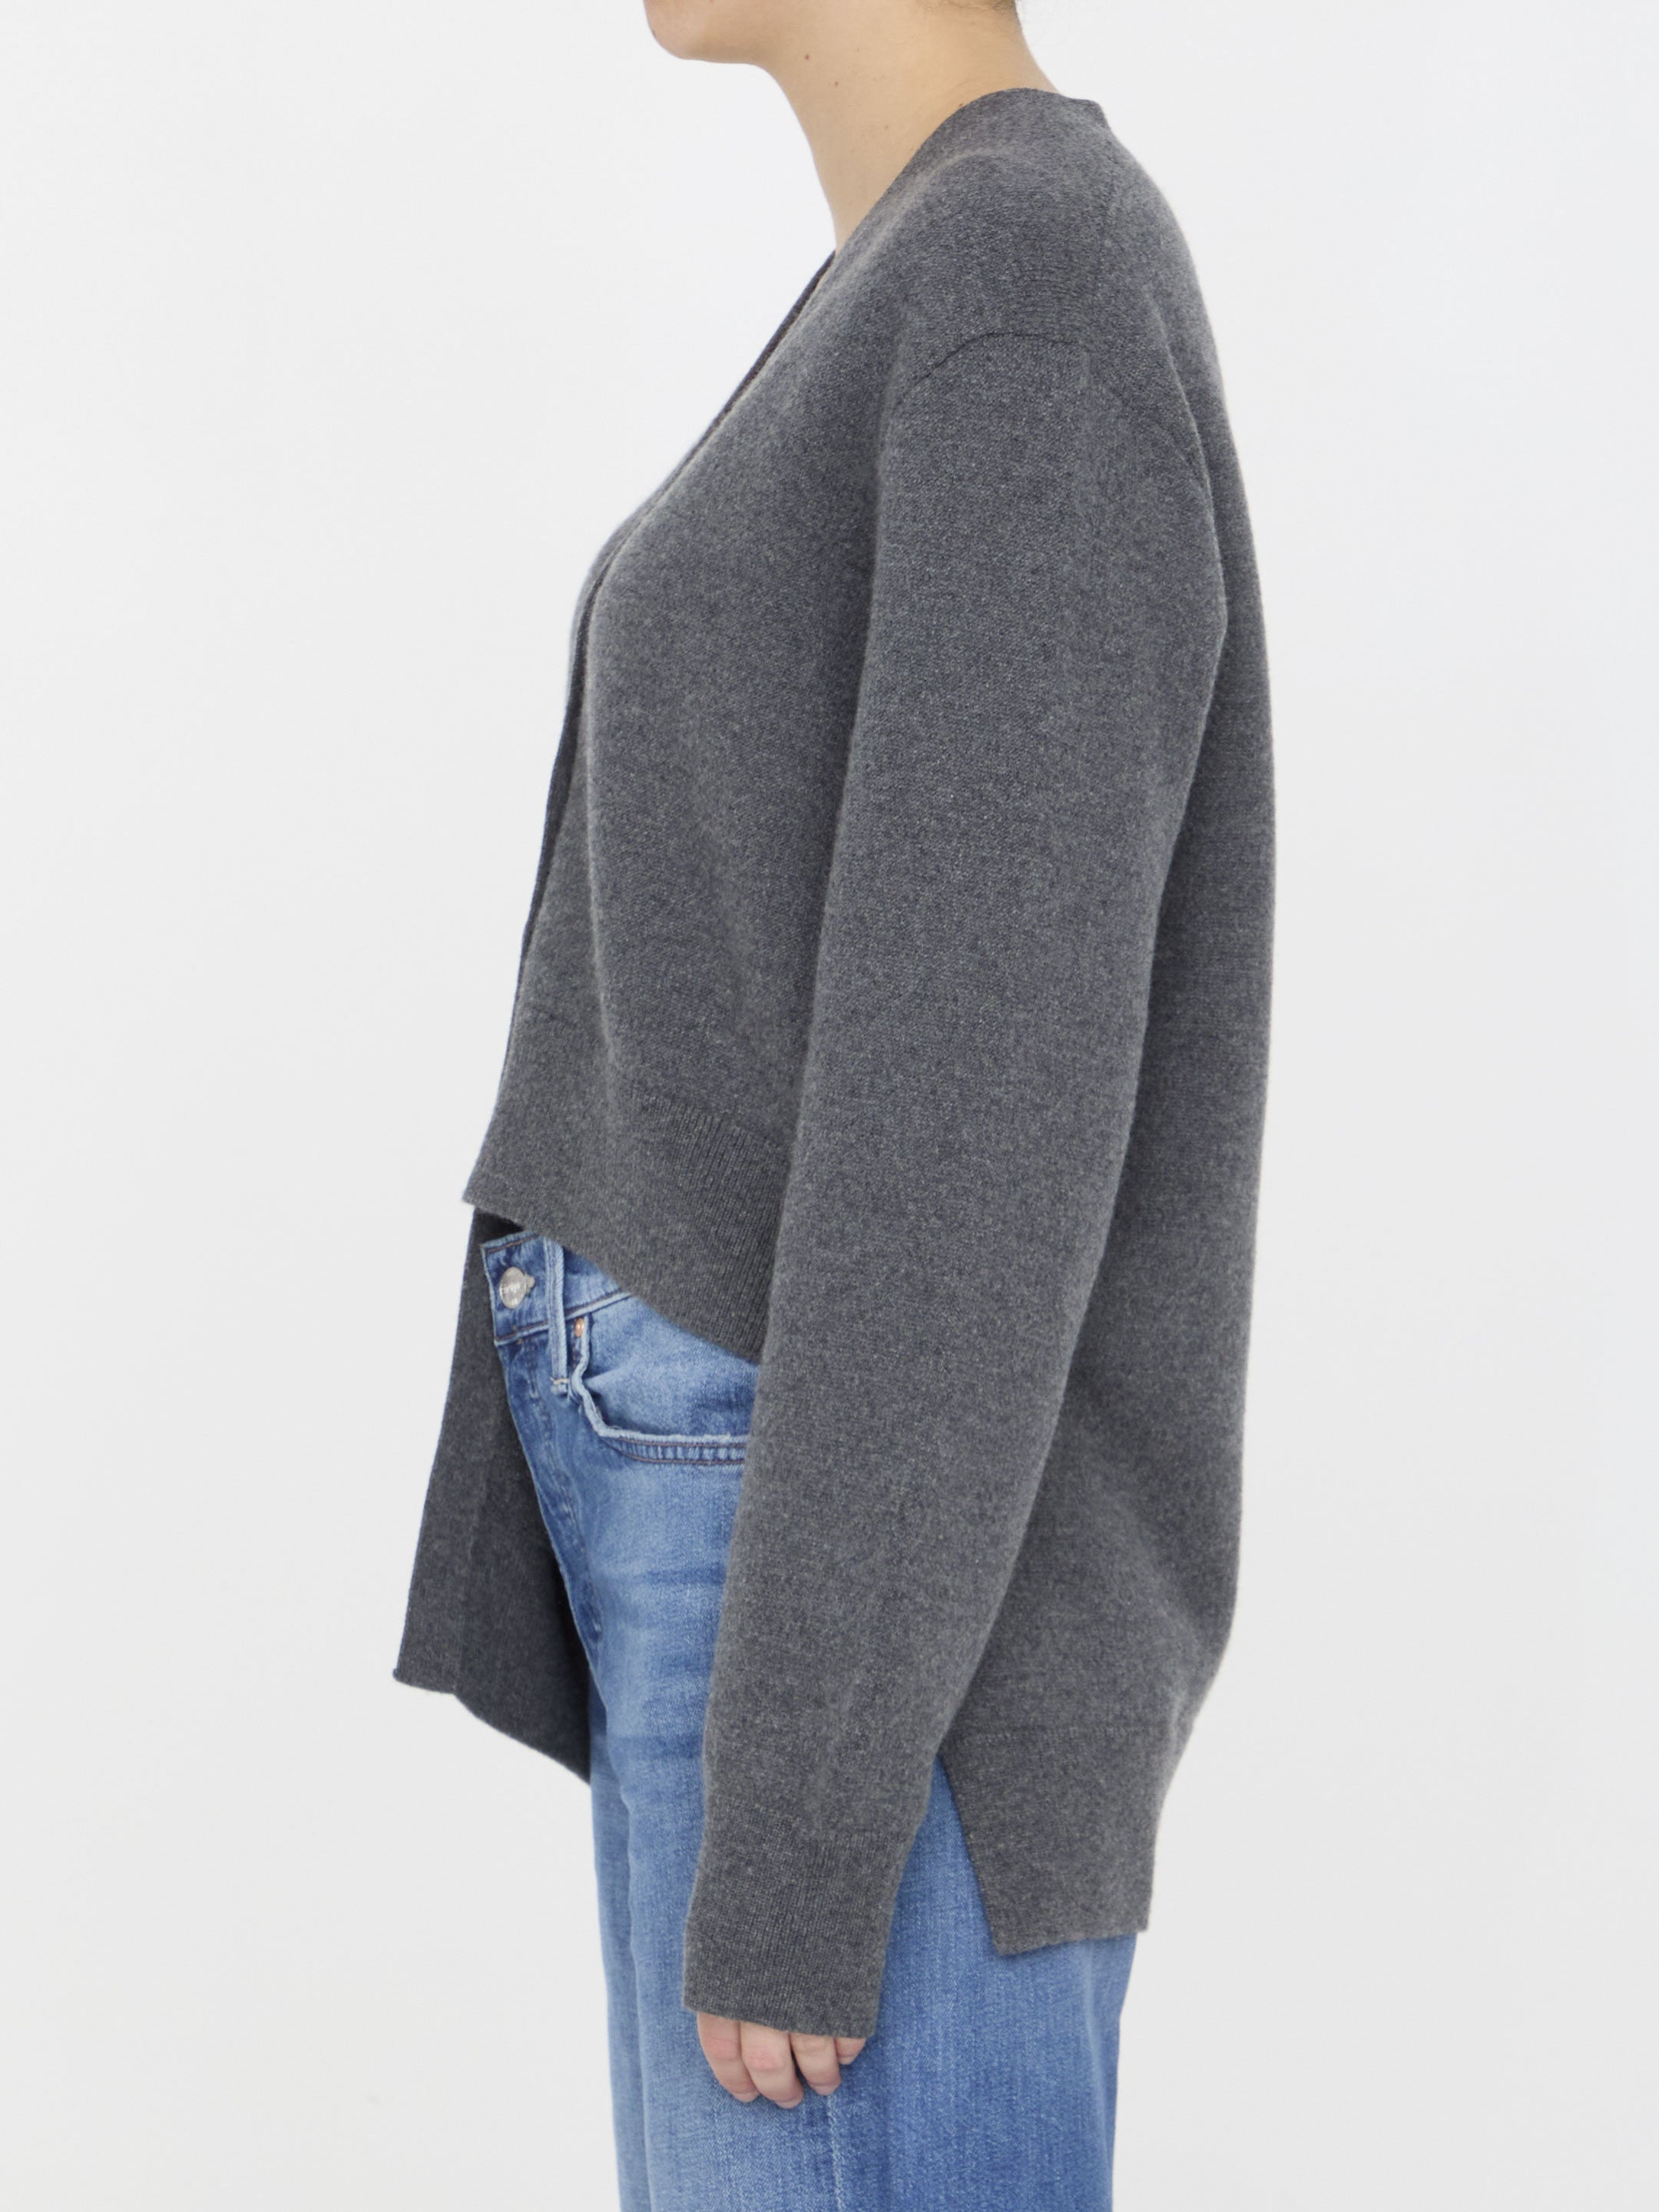 LOEWE-OUTLET-SALE-Asymmetric-cardigan-in-cashmere-Strick-ARCHIVE-COLLECTION-3.jpg